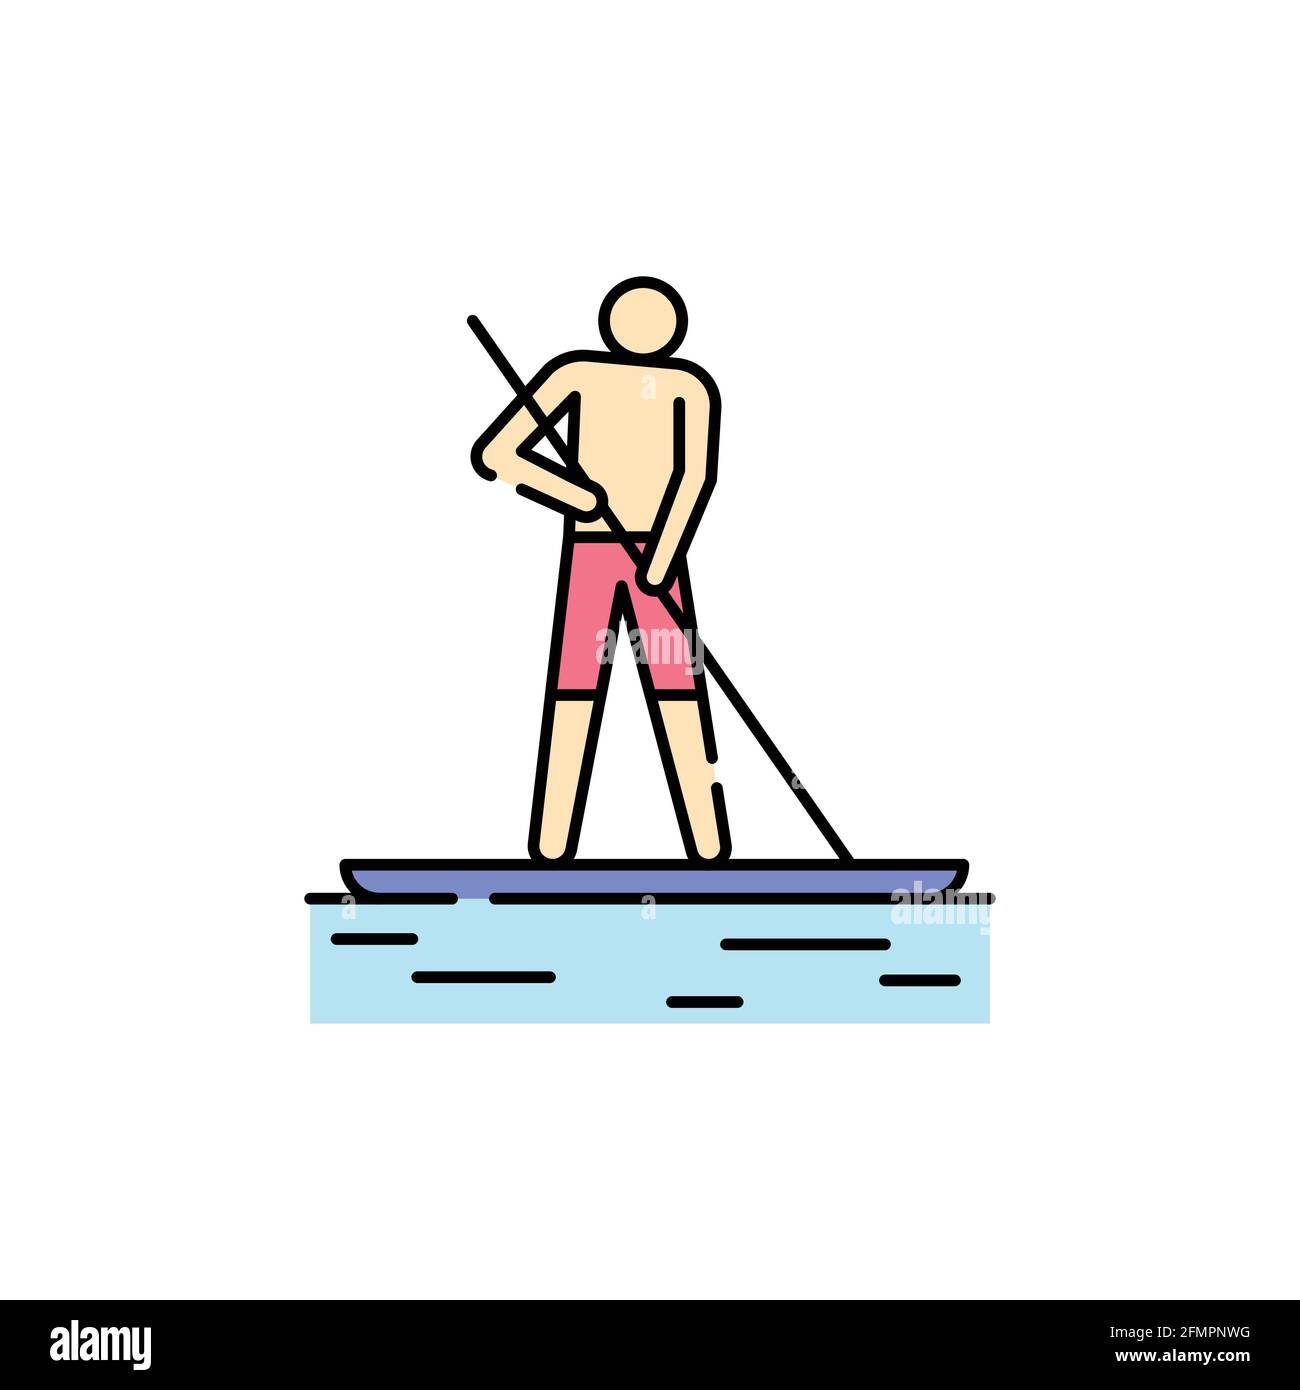 Paddleboarding color line icon. Isolated vector element. Outline pictogram for web page, mobile app, promo Stock Vector